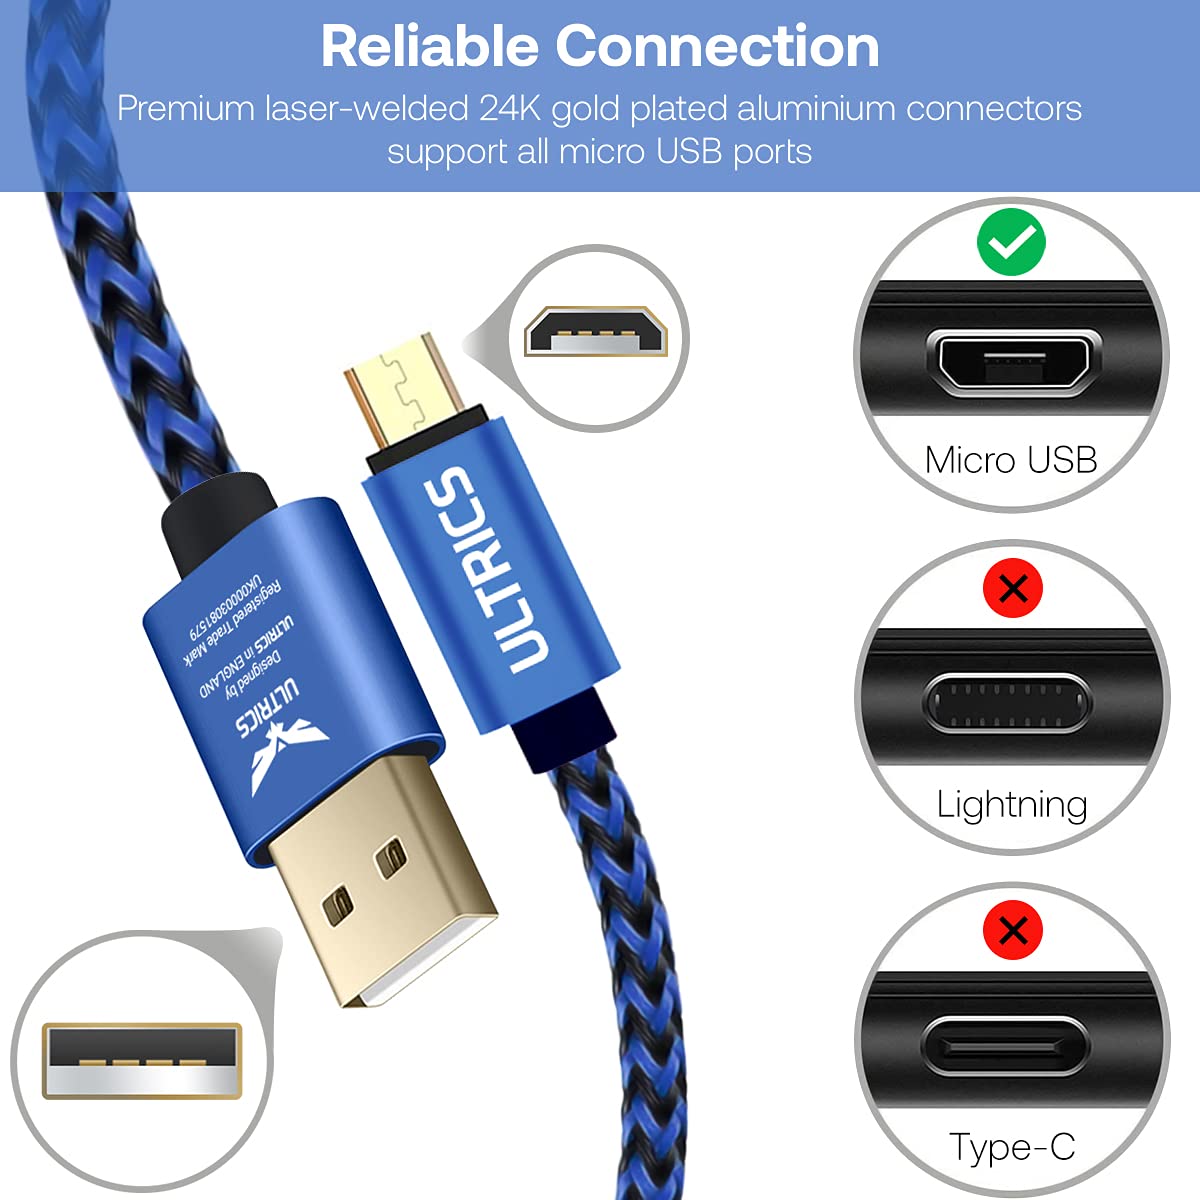 ULTRICS Micro USB Cable 1M, (2 Pack) Nylon Braided Durable Android Charger Lead, Fast Charging and Data Sync Cord Compatible with Samsung Galaxy S7/ S6 Edge/ S5 J7 LG Nexus Nokia Xbox PS4 - Blue